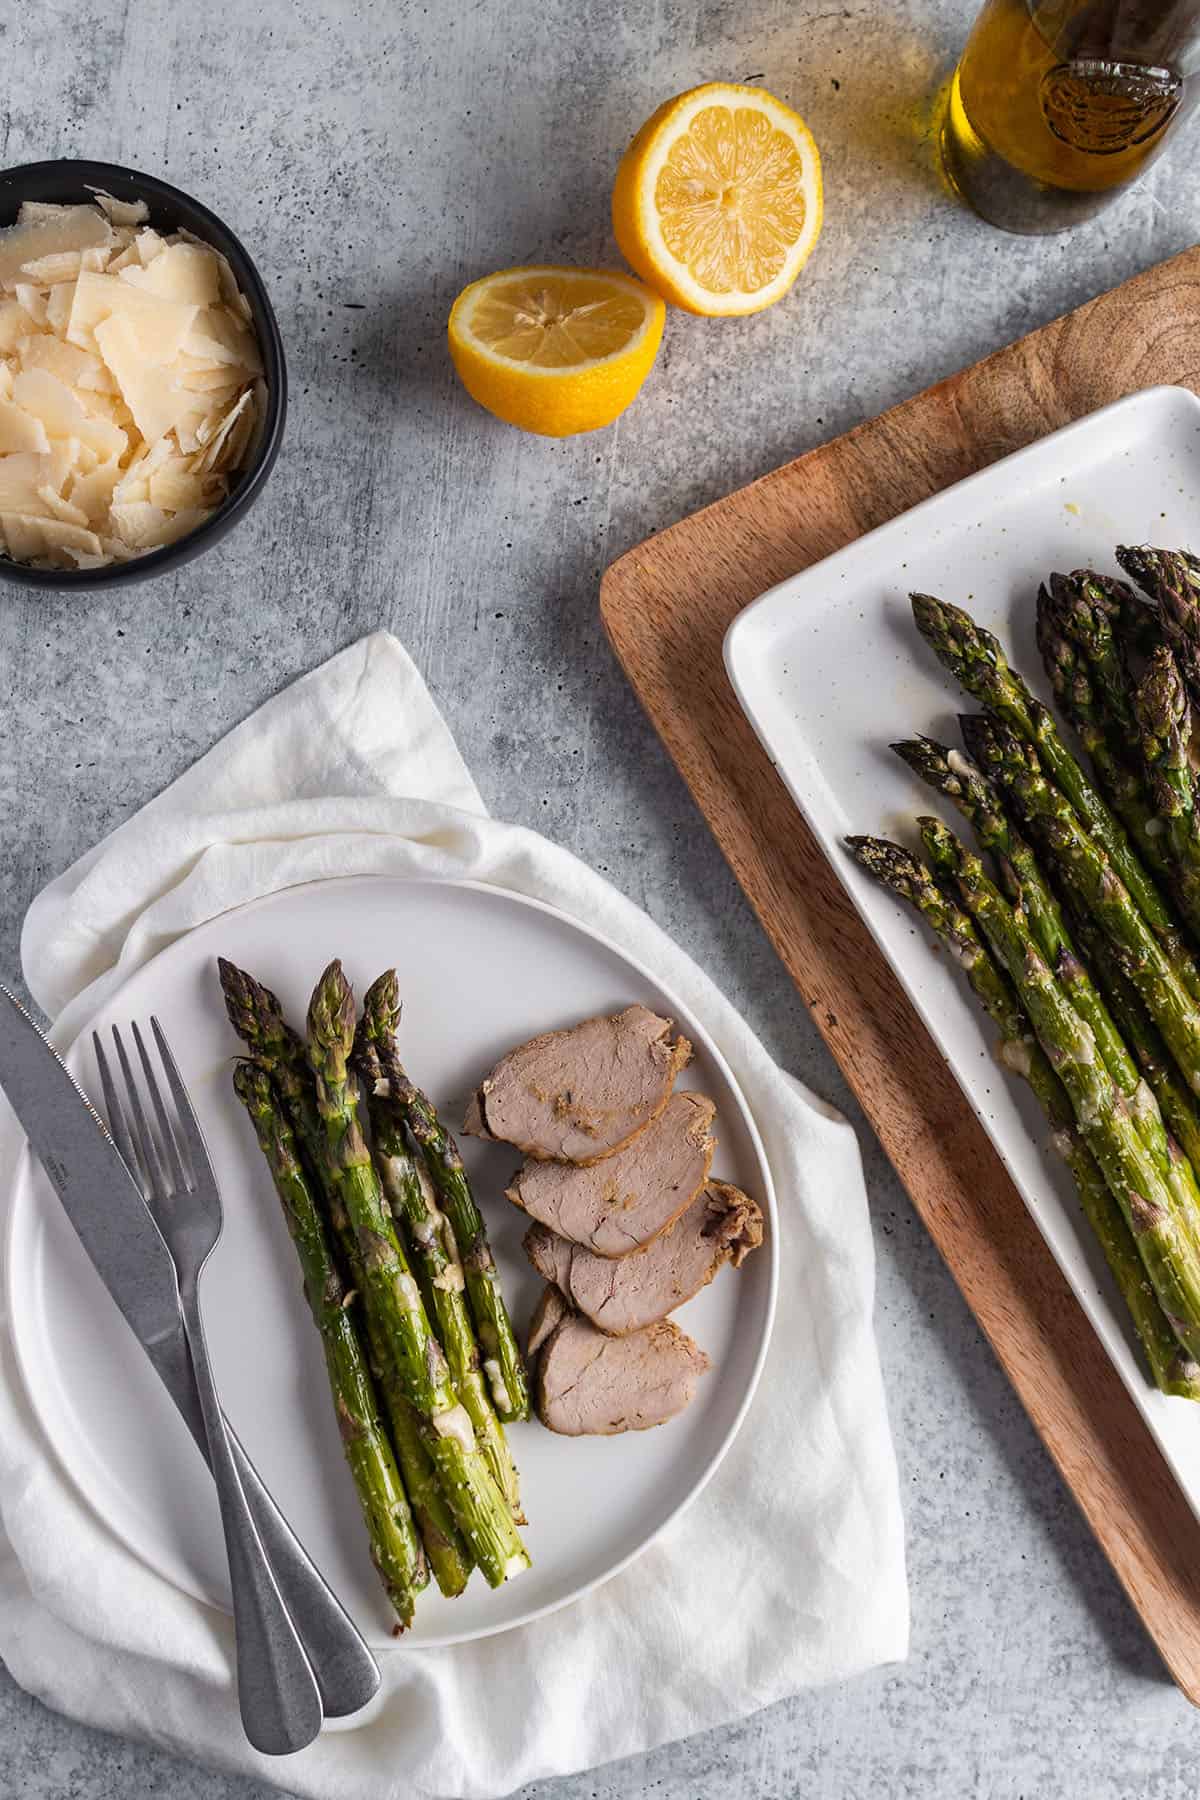 Plate with asparagus and pork with a cutting board with more asparagus, a bowl of parmesan, lemons and olive oil. 